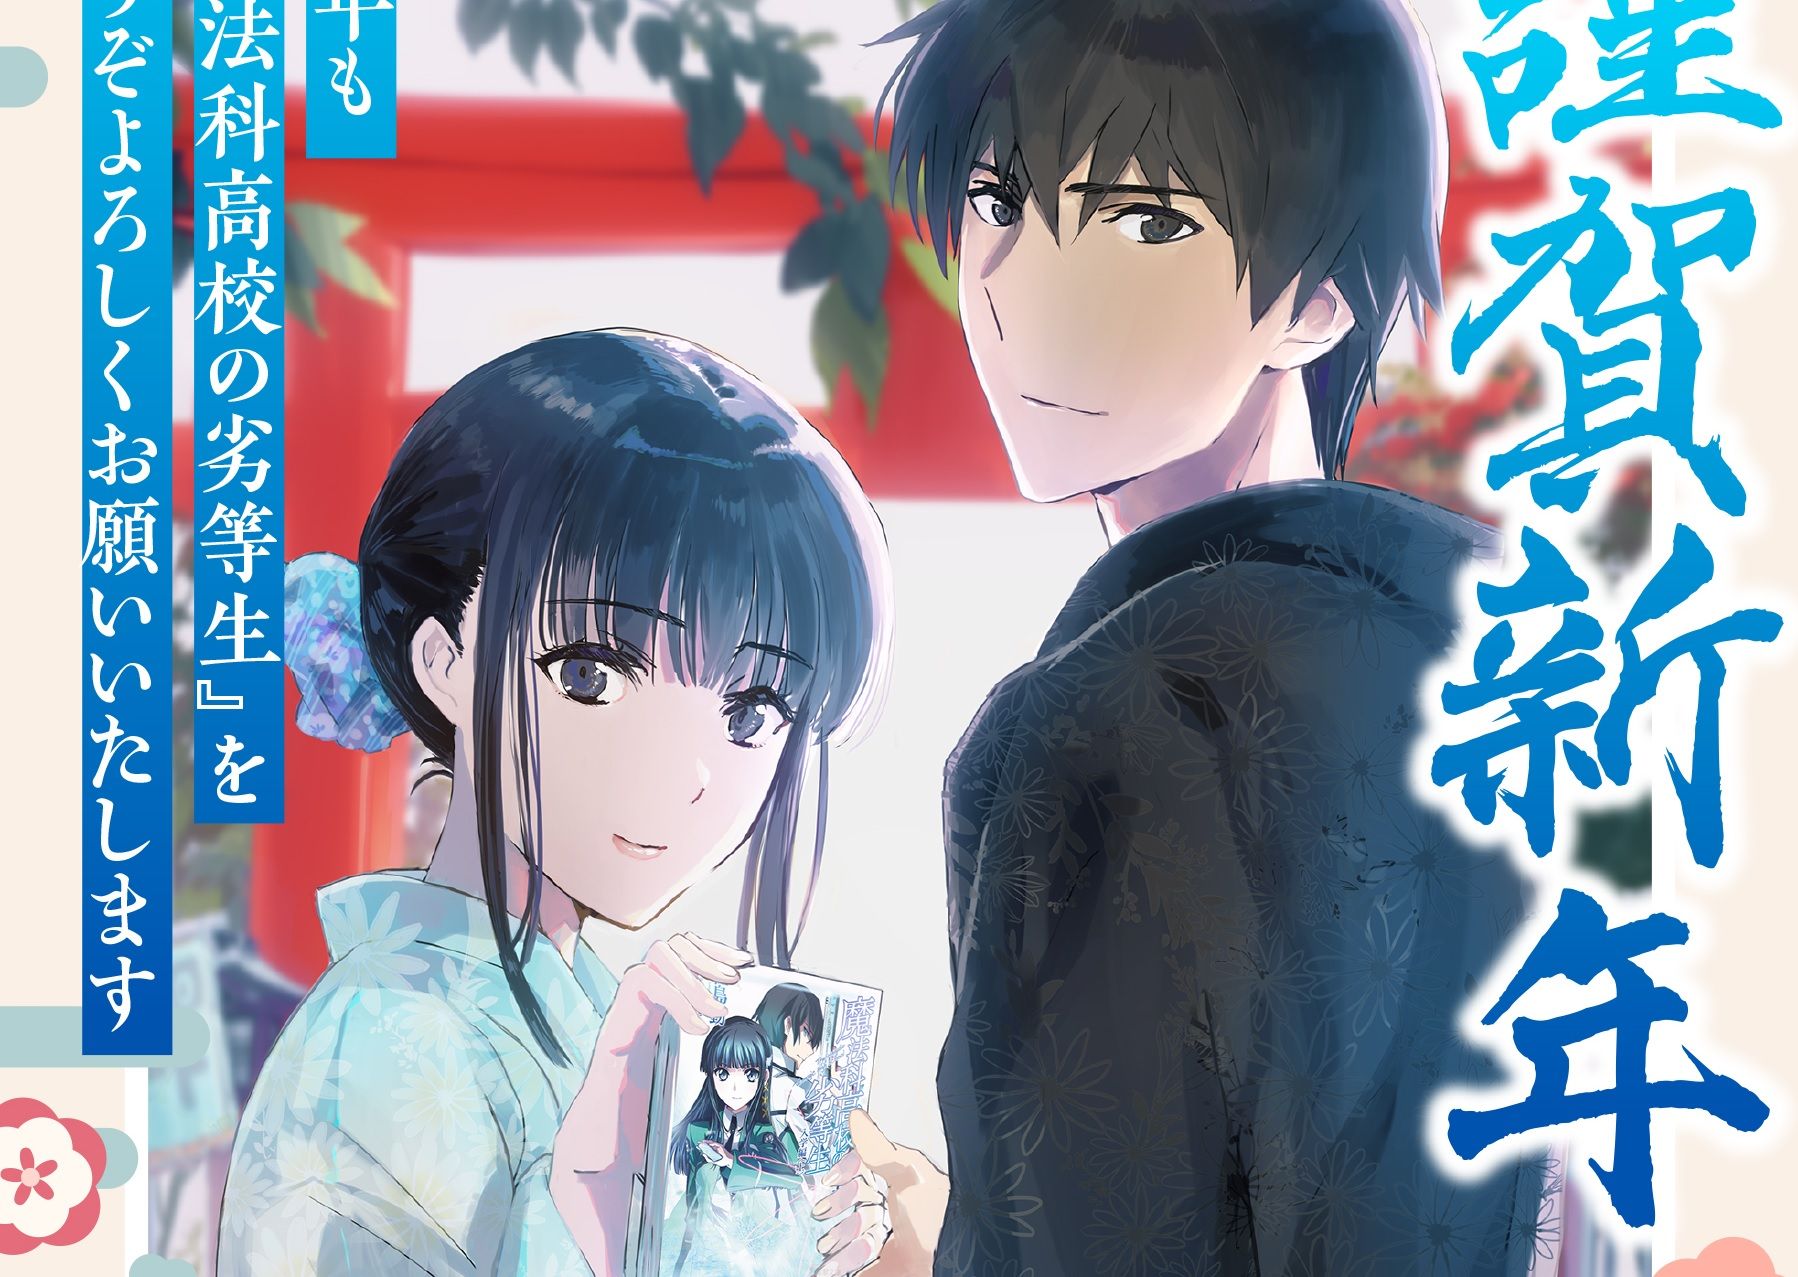 New The Irregular at Magic High School Anime Sequel Confirmed With Trailer